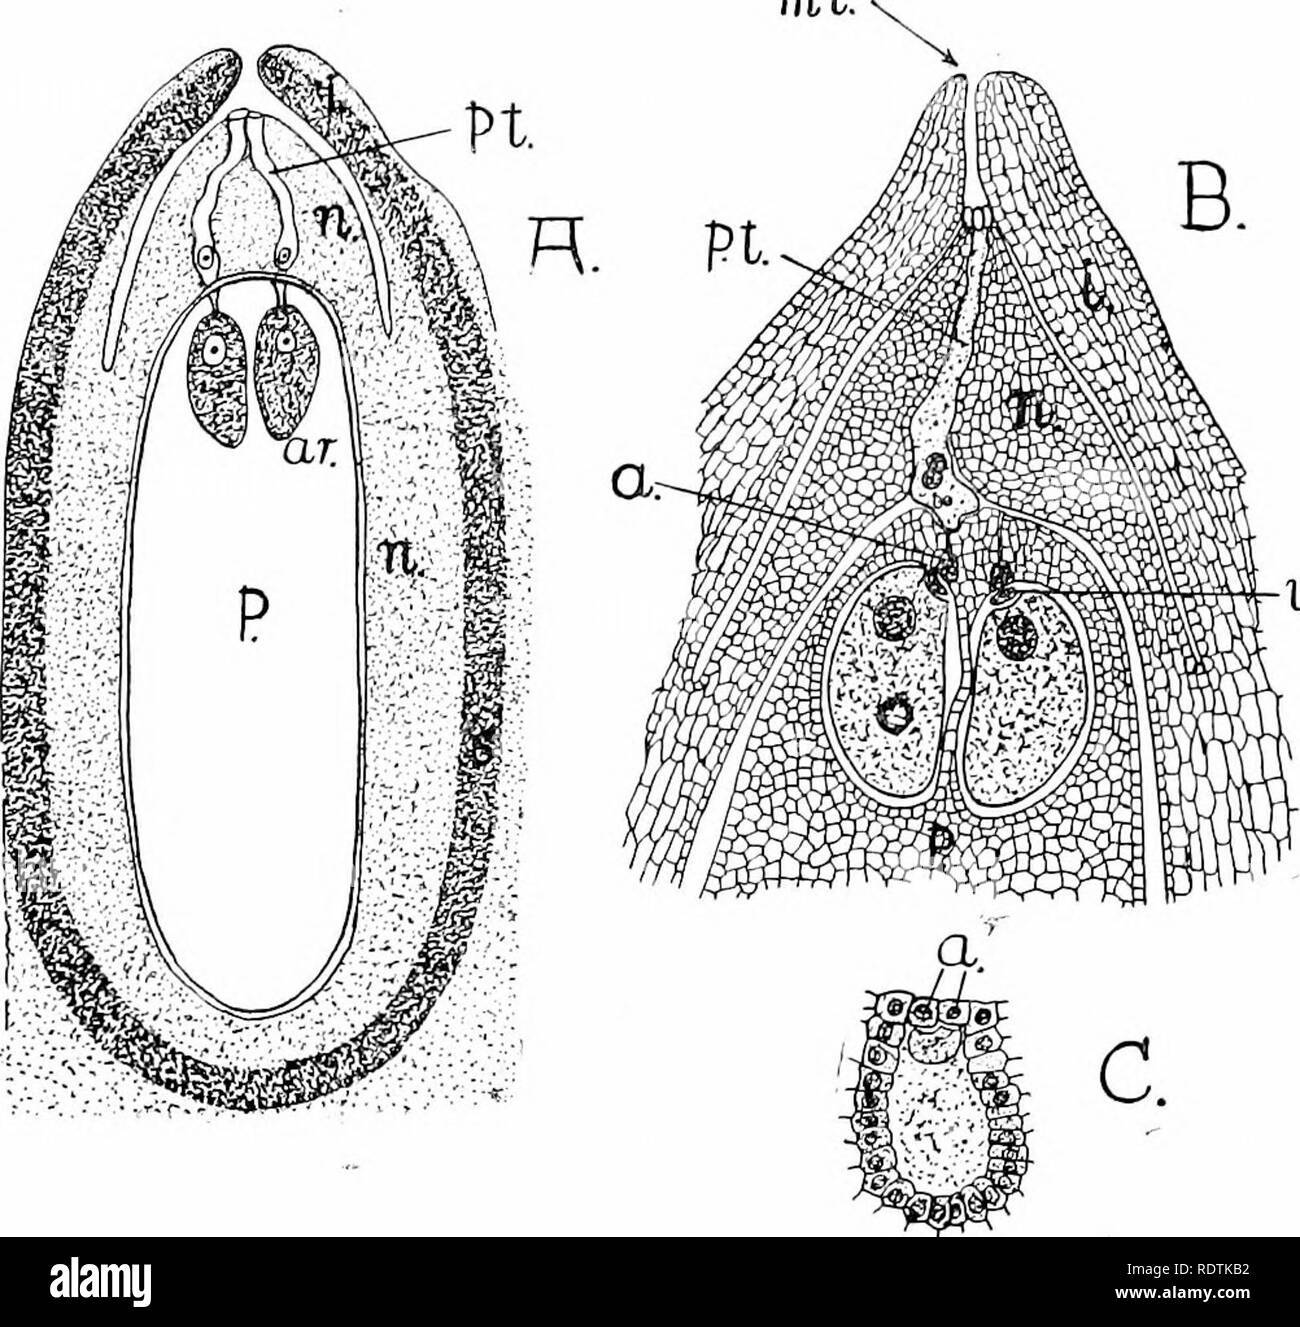 . An introduction to the structure and reproduction of plants. Plant anatomy; Plants. GERMINATION OF POLLEN 349 of two very flat cells, which soon break down (Fig. 204, B, v.c). The remaining and larger portion of the pollen grain forms the so-called tube cell (/.».). On reaching the nucellus the outer membrane of the microspore is ruptured, and the tube cell grows out to form the pollen tube (Fig. 203, A, p.t.), into whose mi.. uc. Fig. 203.—Structure of the Ovule of Piniis. A, Diagrammatic longitudinal section of mature ovule (after Co^ilter and Chamberlain). B, Front portion of same greatly Stock Photo